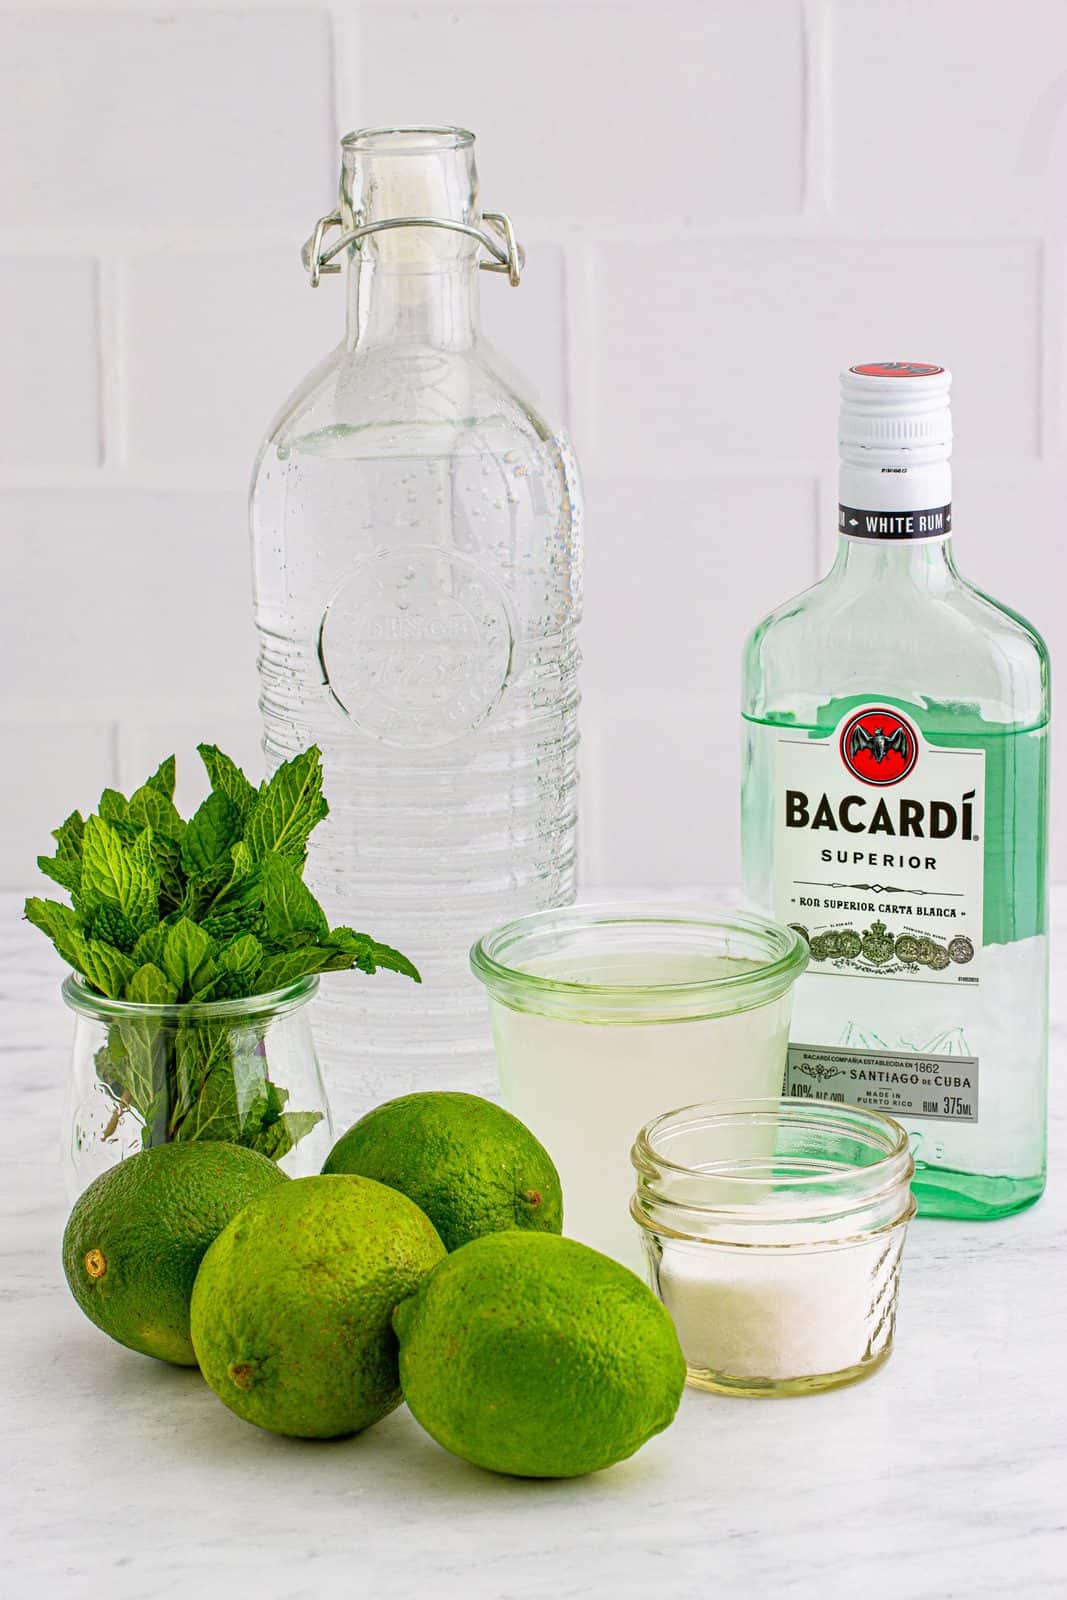 Ingredients needed: limes, mint, granulated sugar, simple syrup, white rum, club soda and ice.